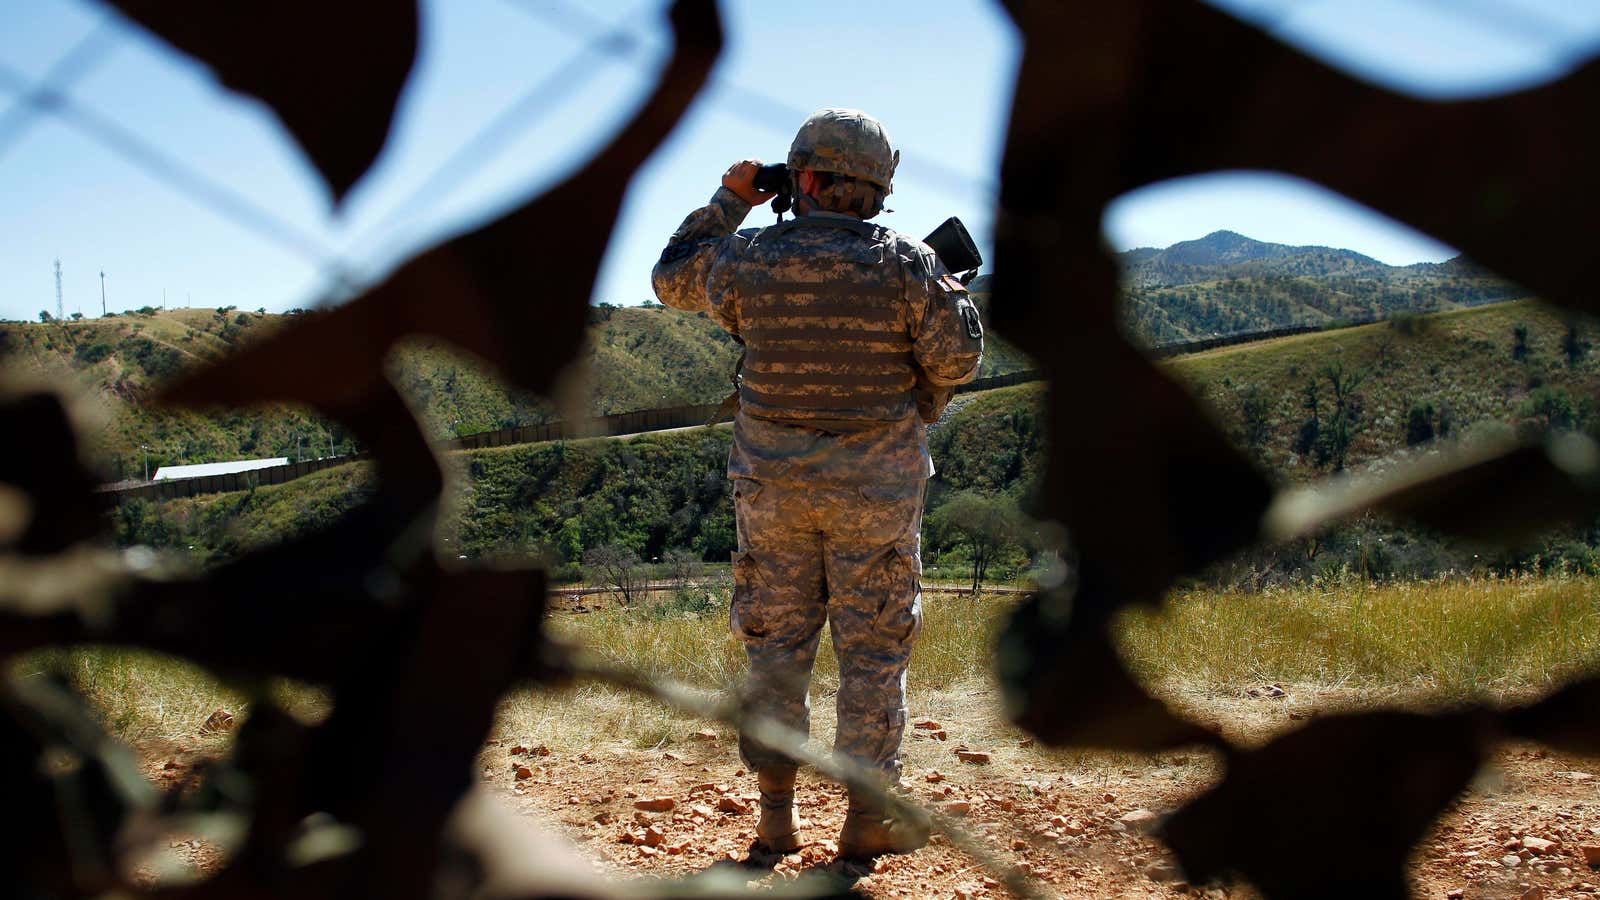 A member of the United States National Guard patrols along the U.S. and Mexico border in Nogales, Arizona in 2010.